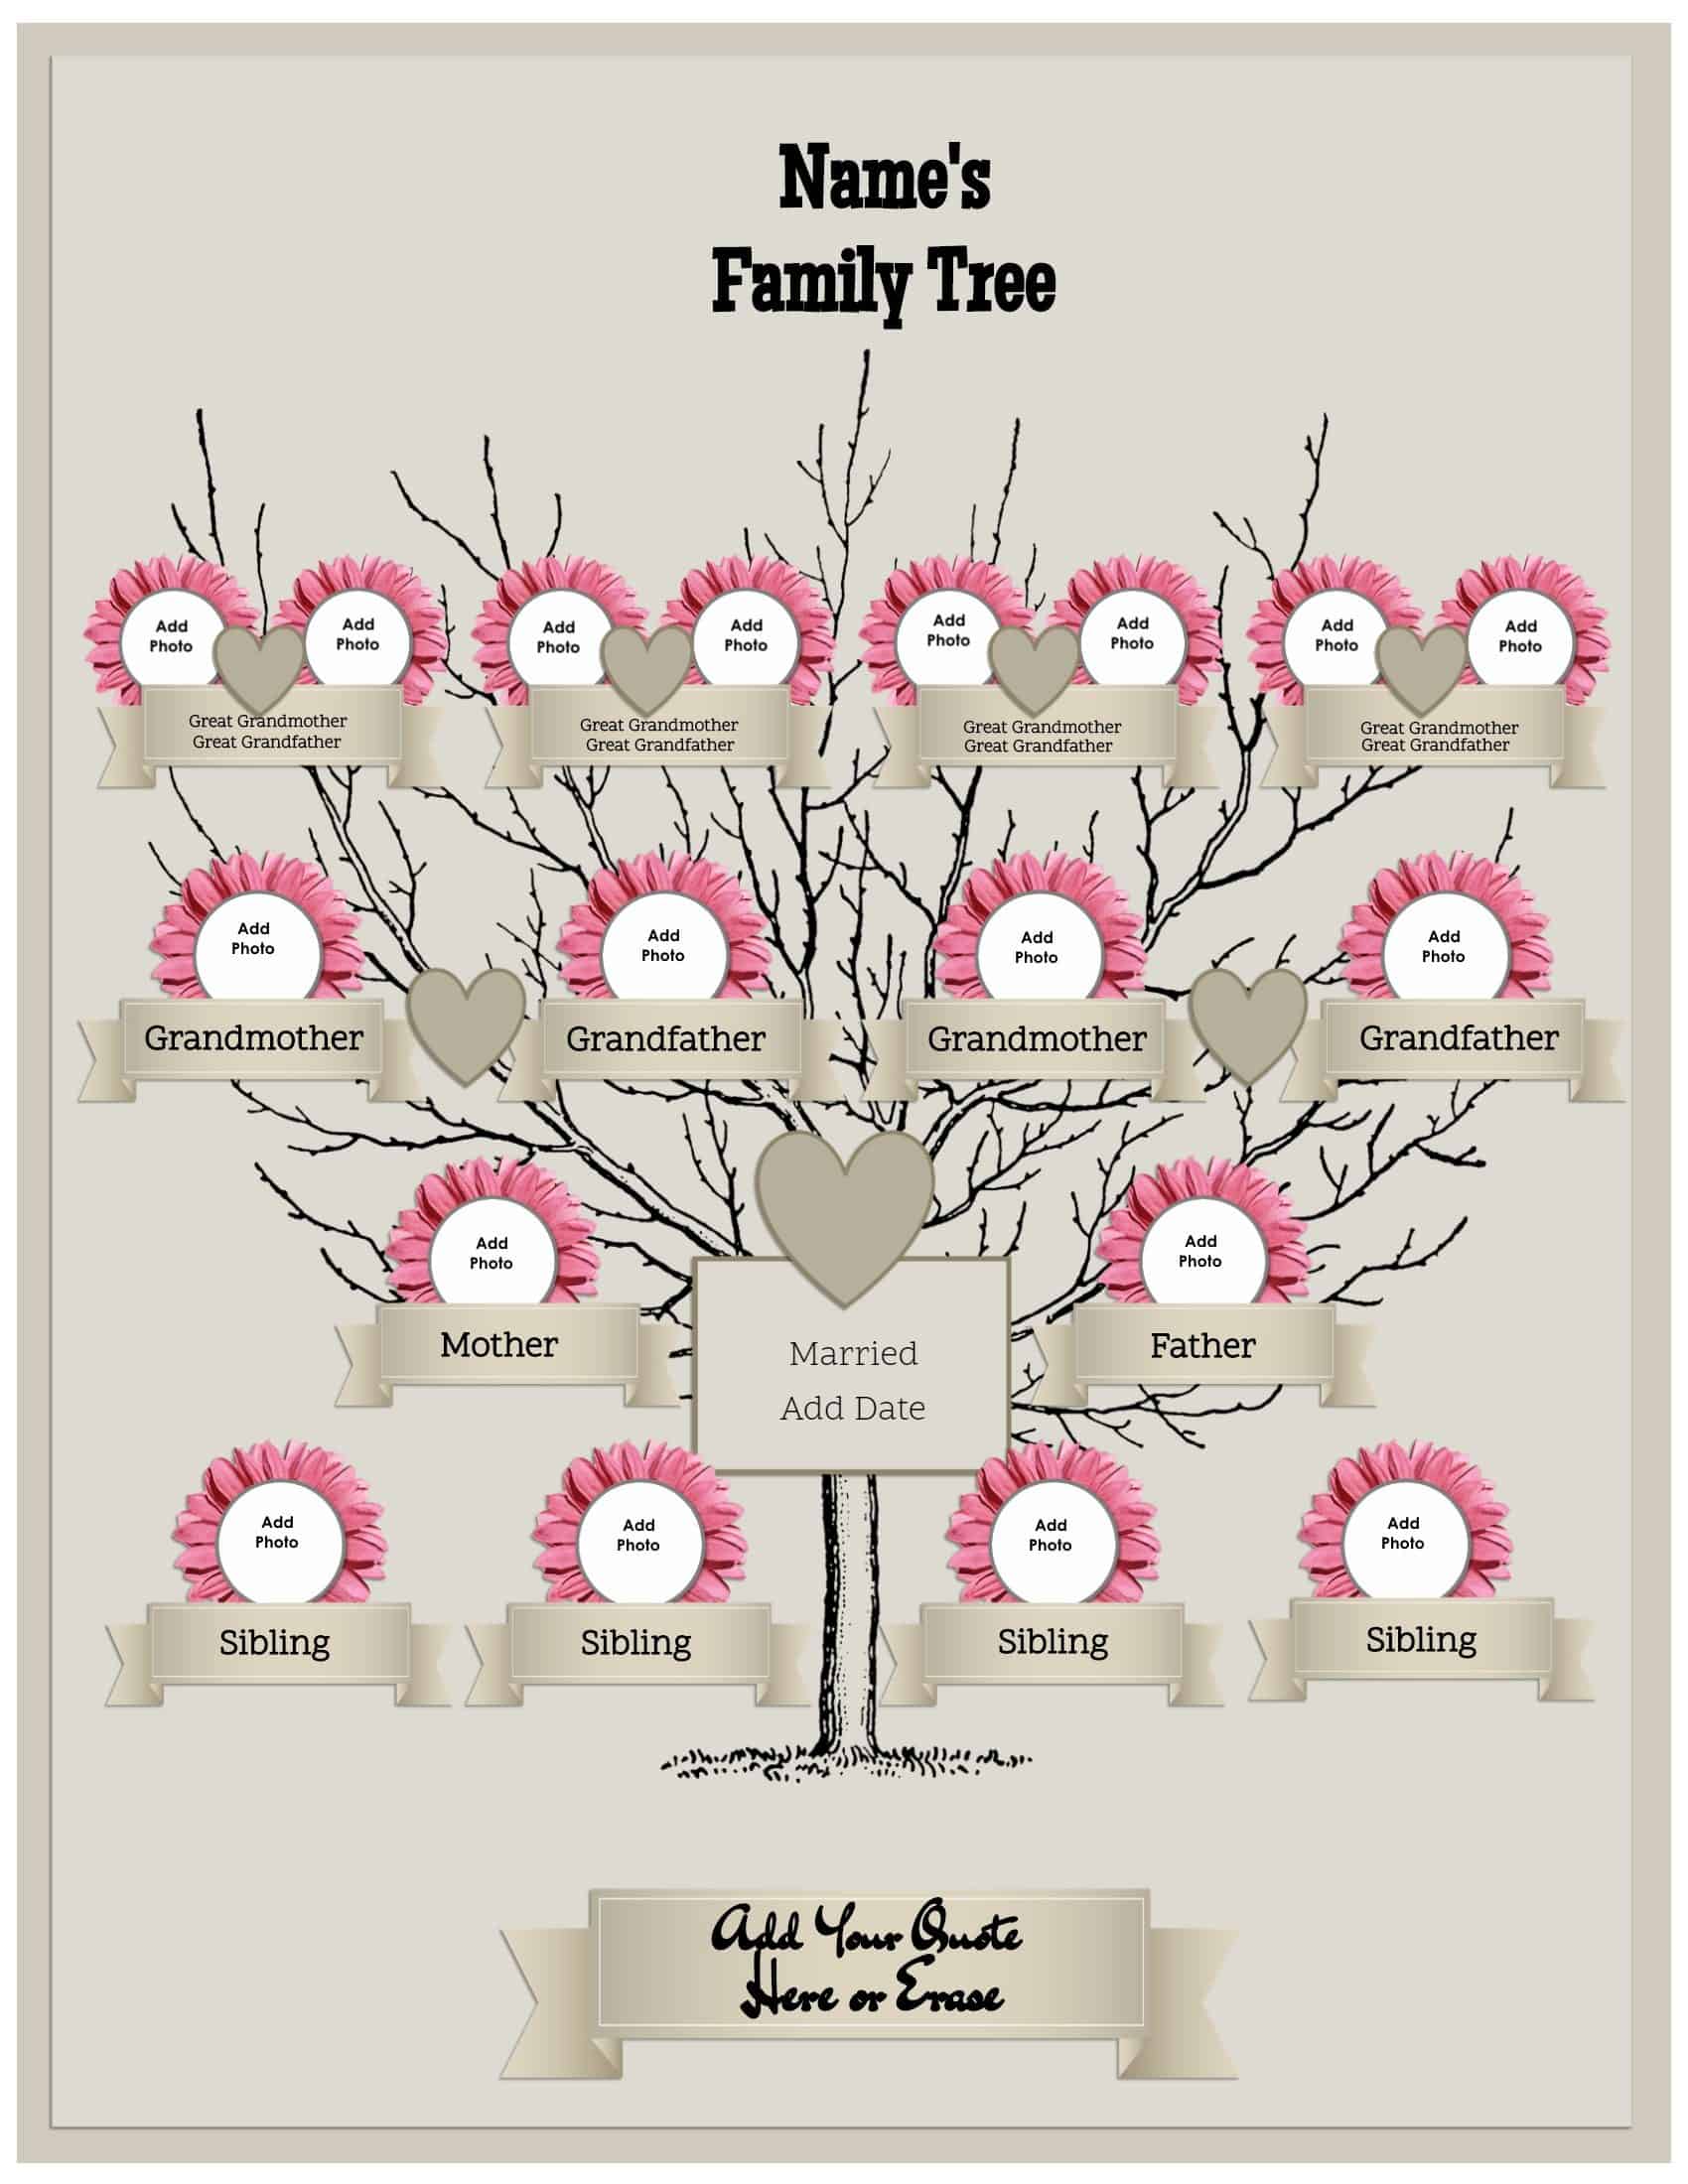 4 Generation Family Tree Template Free to Customize & Print